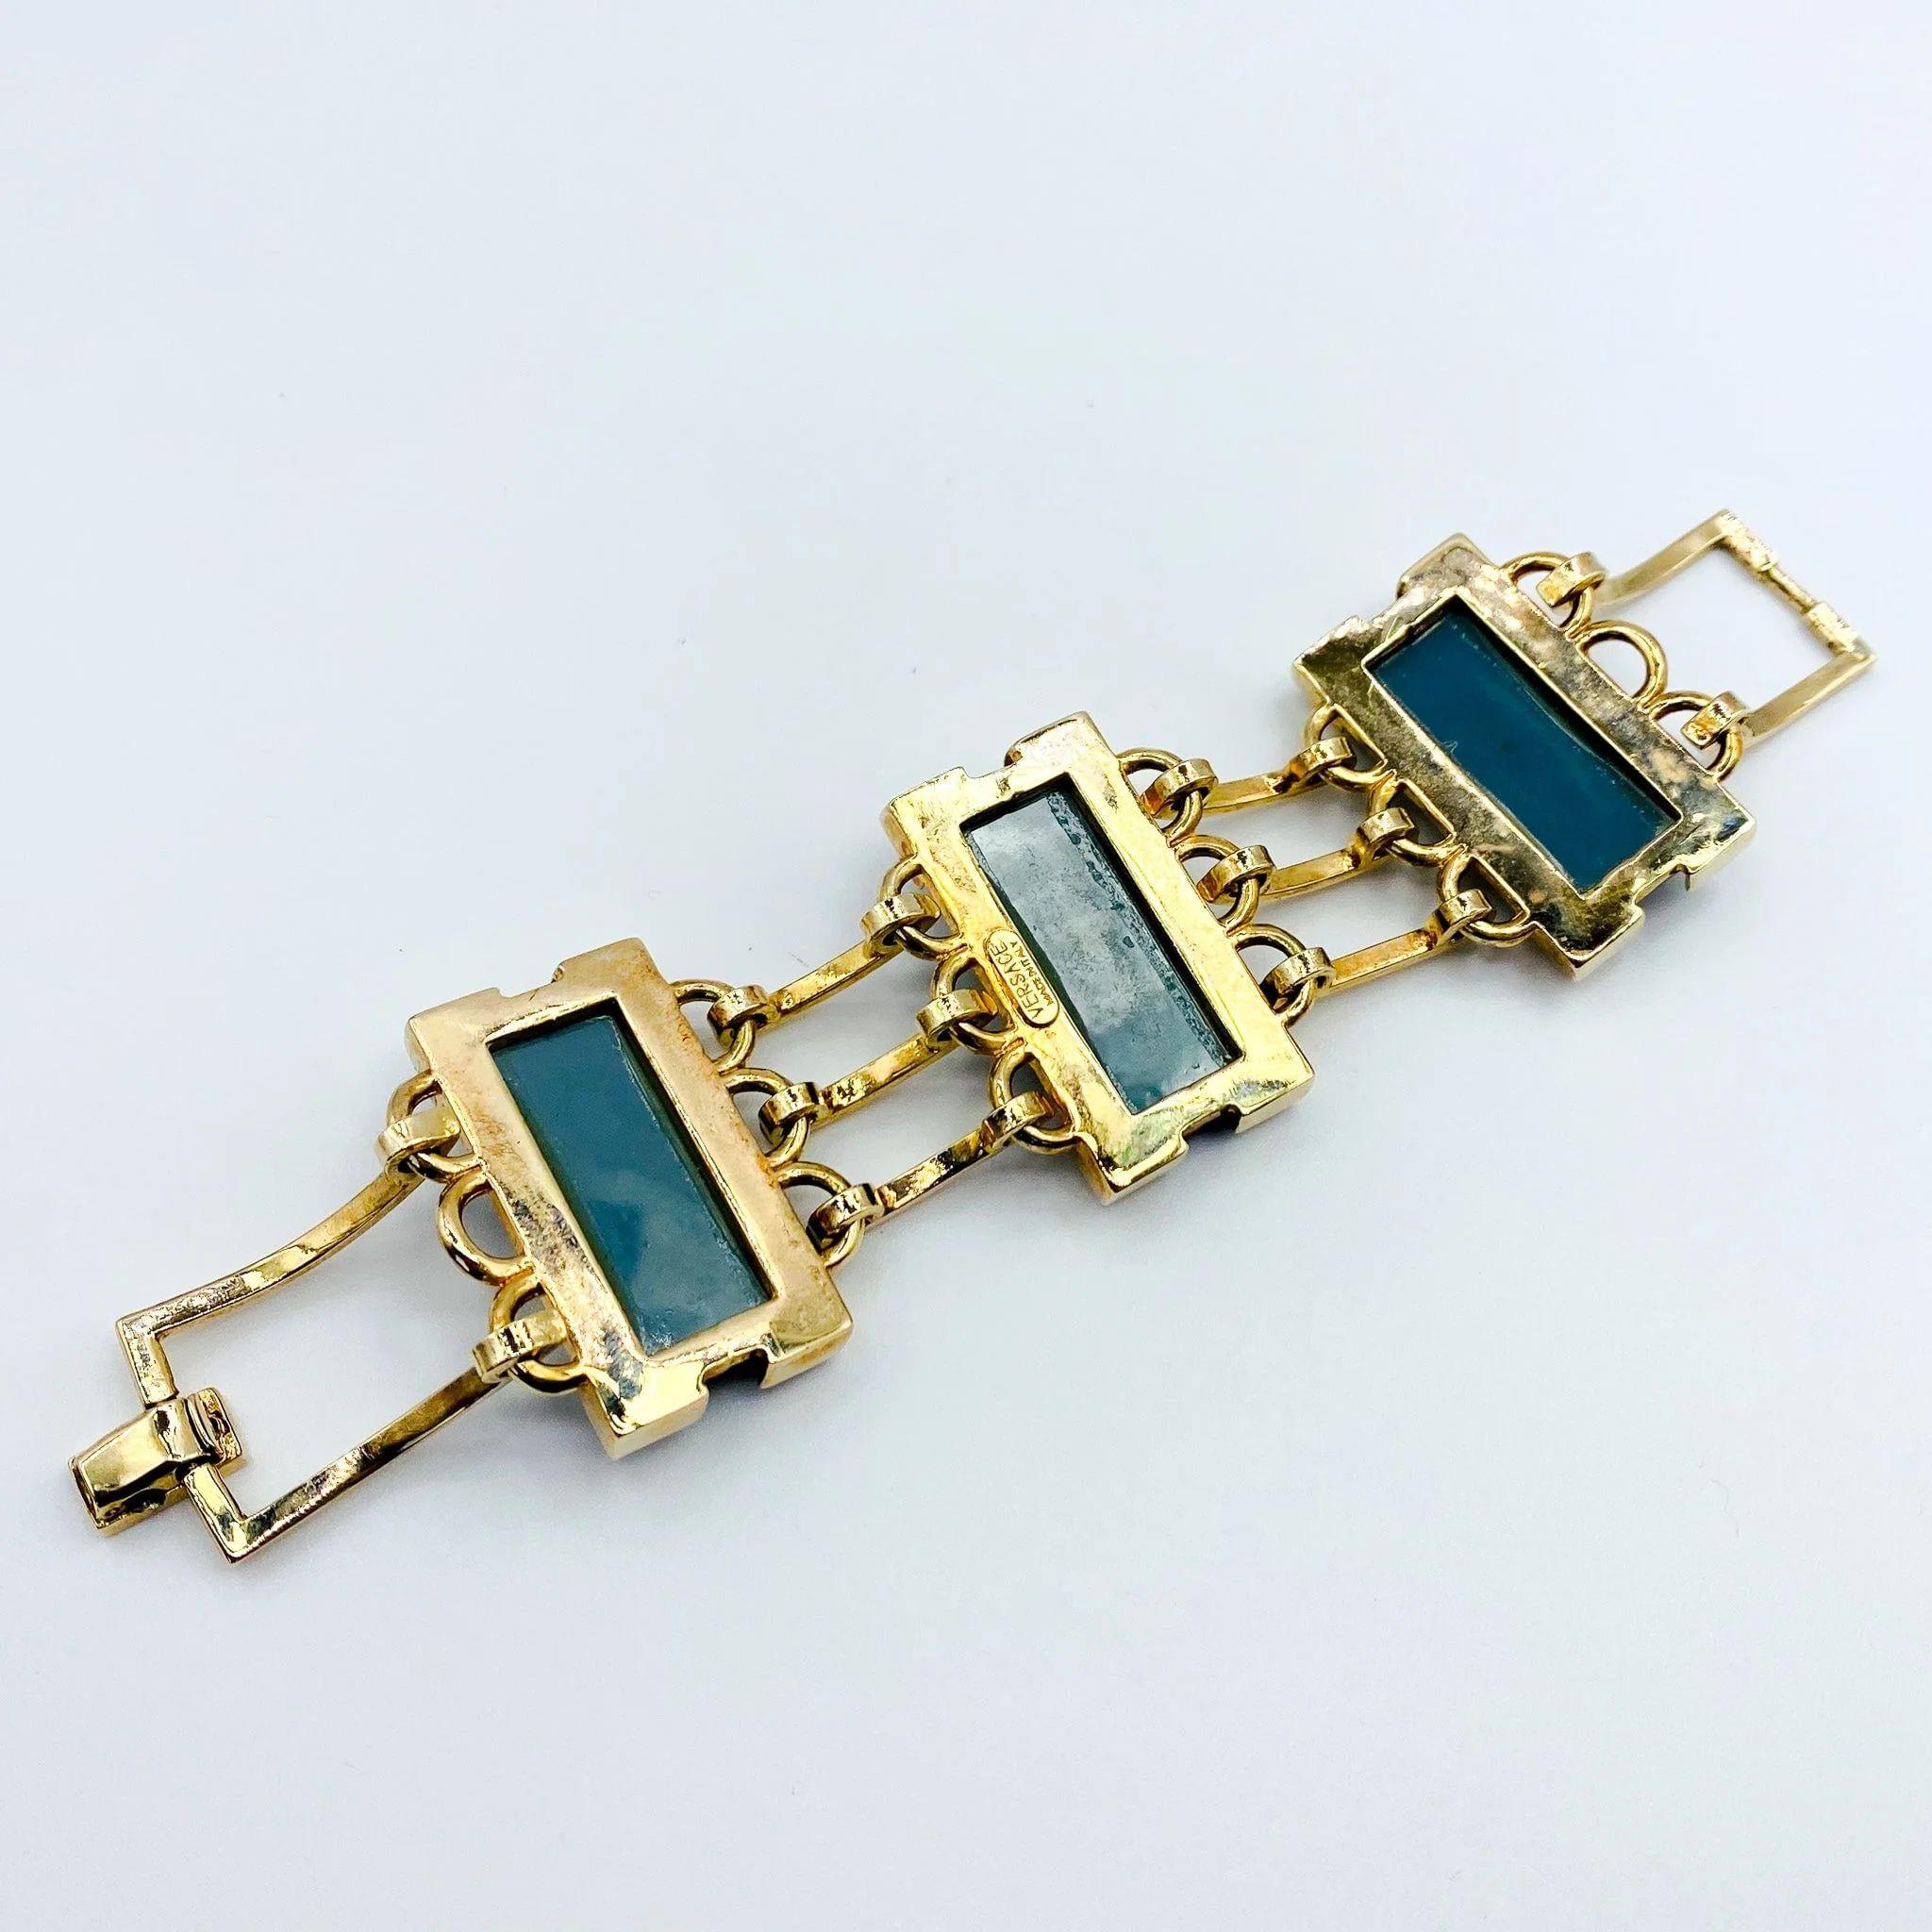 Versace Bracelet  - Preloved Statement Cuff

This exquisite Versace preloved cuff bracelet is a real head-turner! Featuring a gate-style bracelet with three large aquamarine stones, it's a statement piece that will take any outfit to the next